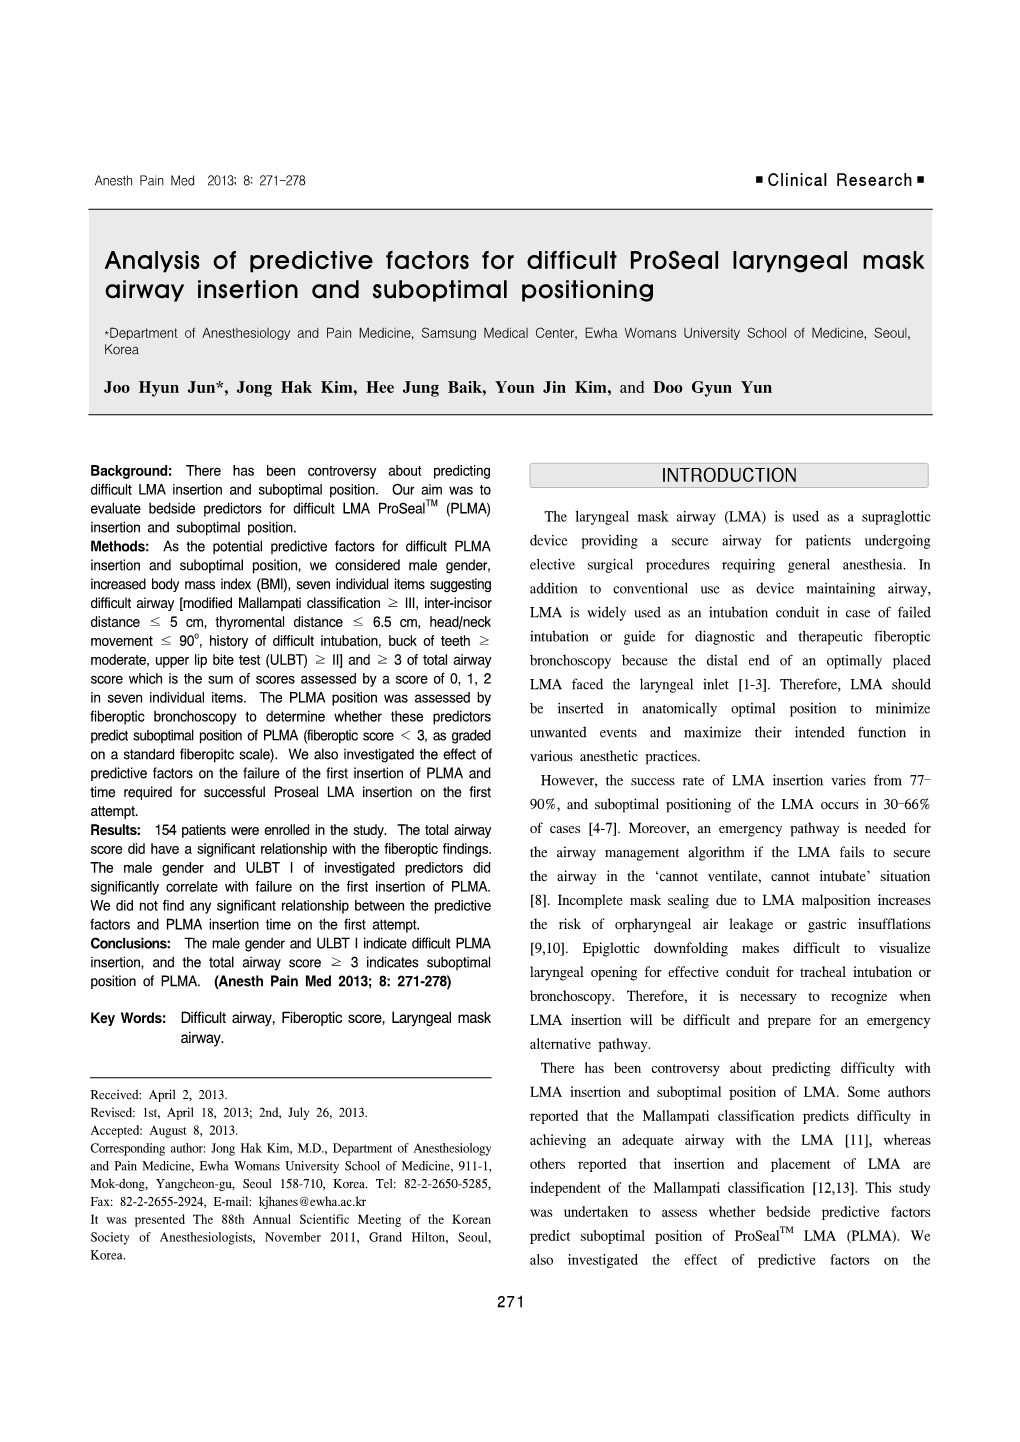 Analysis of Predictive Factors for Difficult Proseal Laryngeal Mask Airway Insertion and Suboptimal Positioning